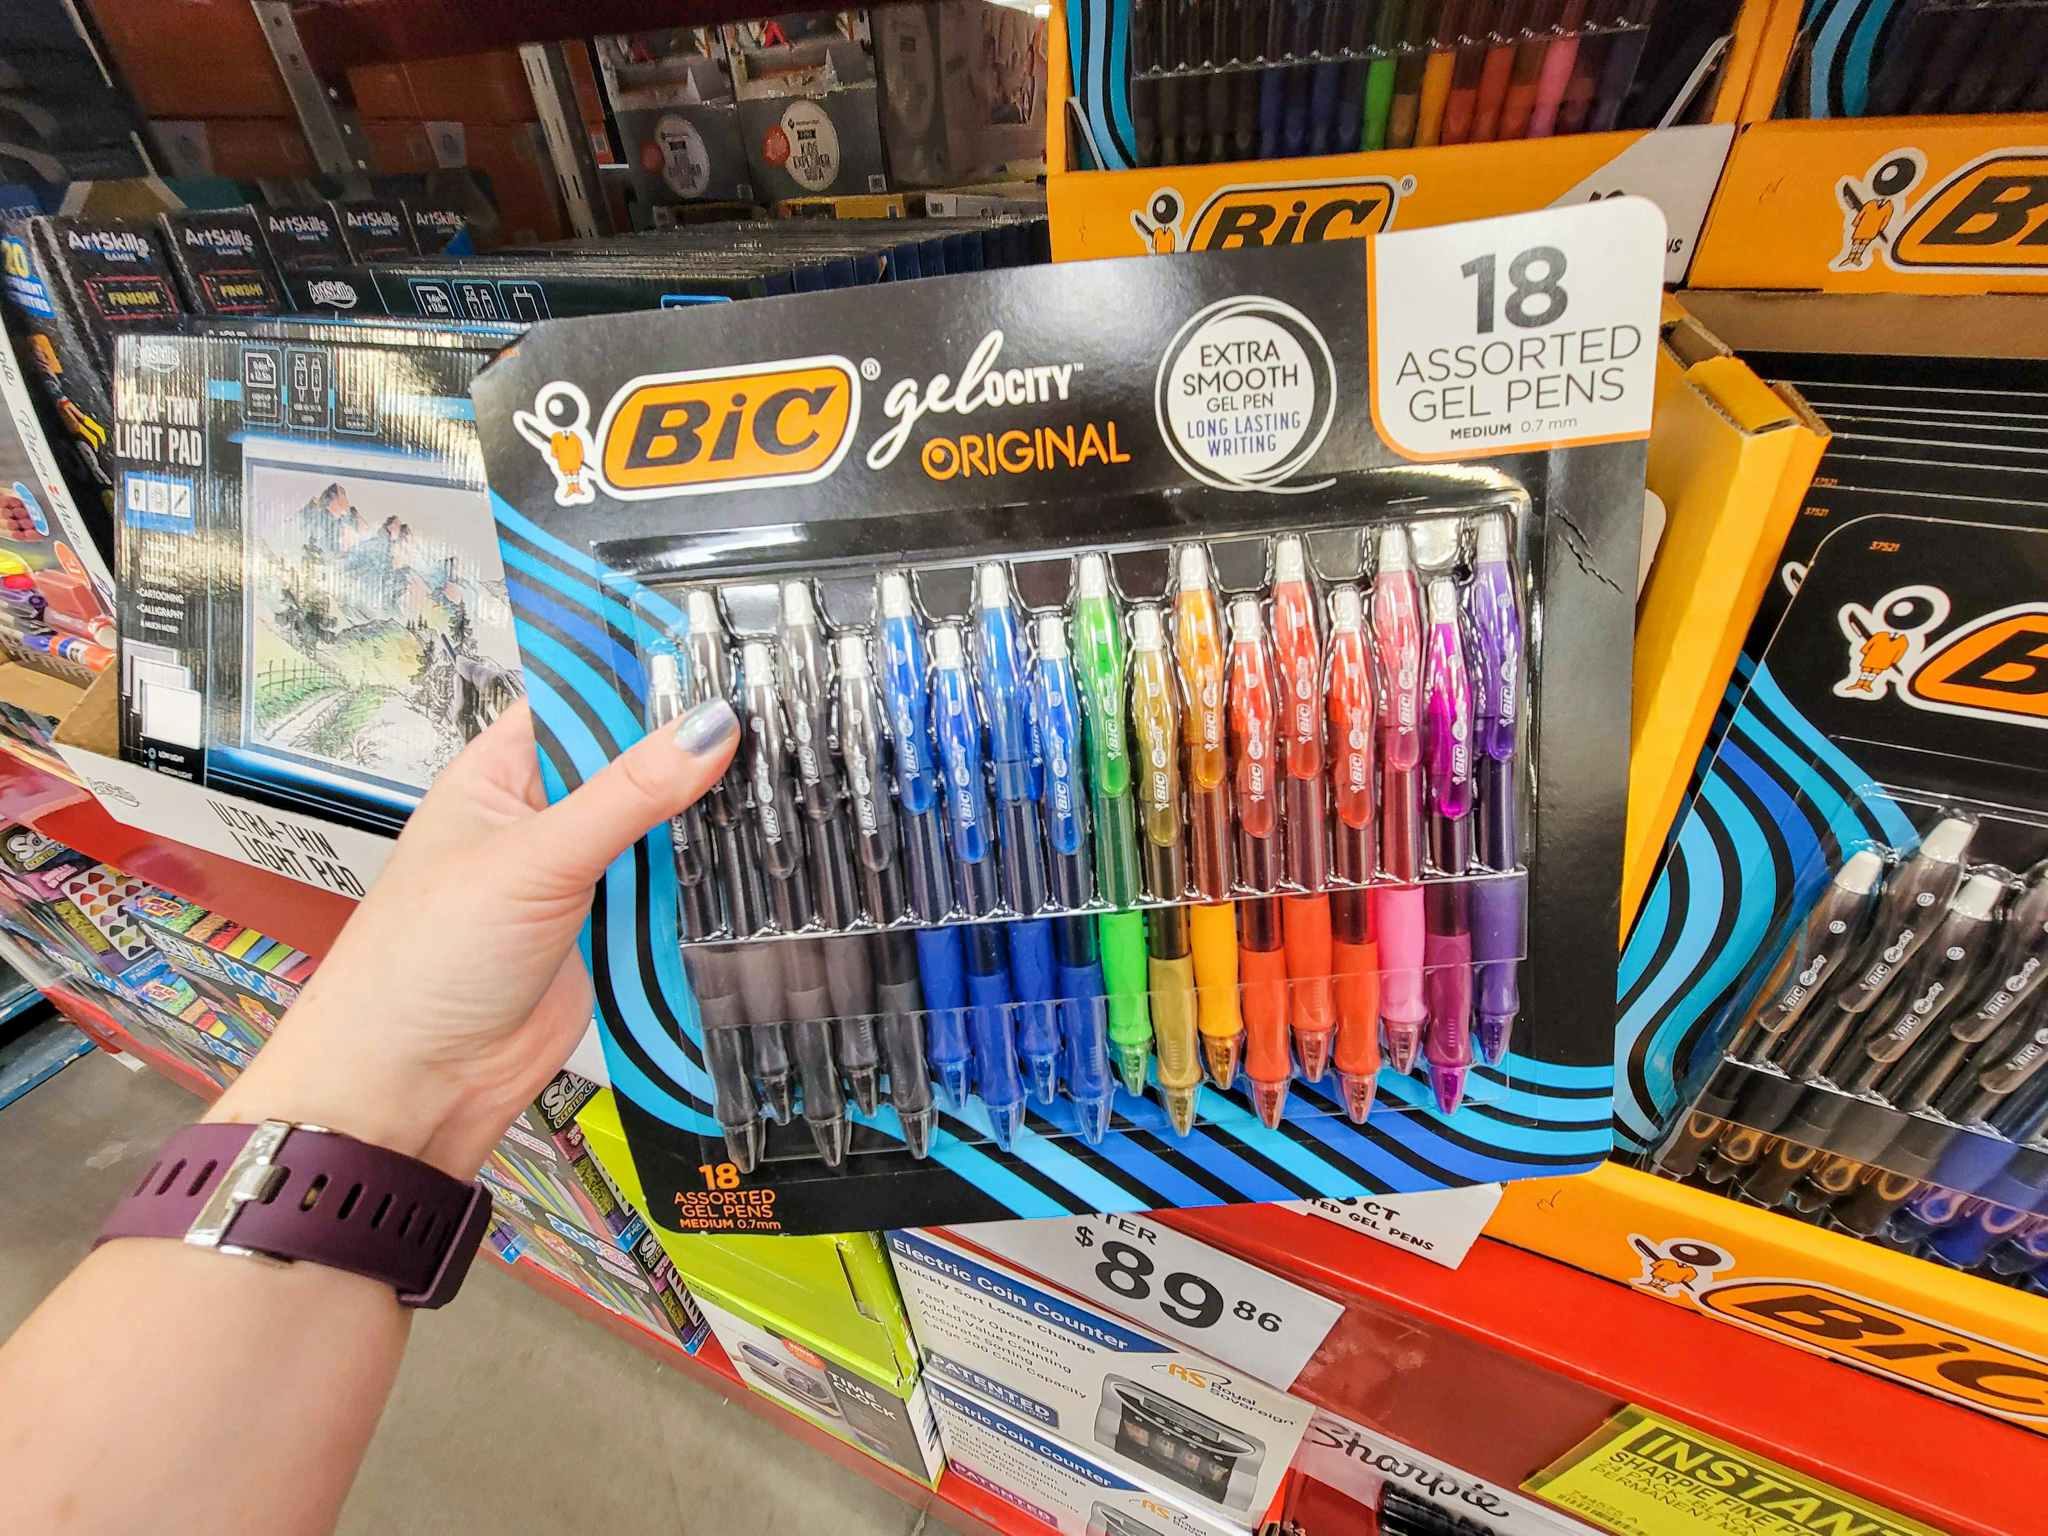 hand holding a pack of 18 bic gelocity multi colored pens